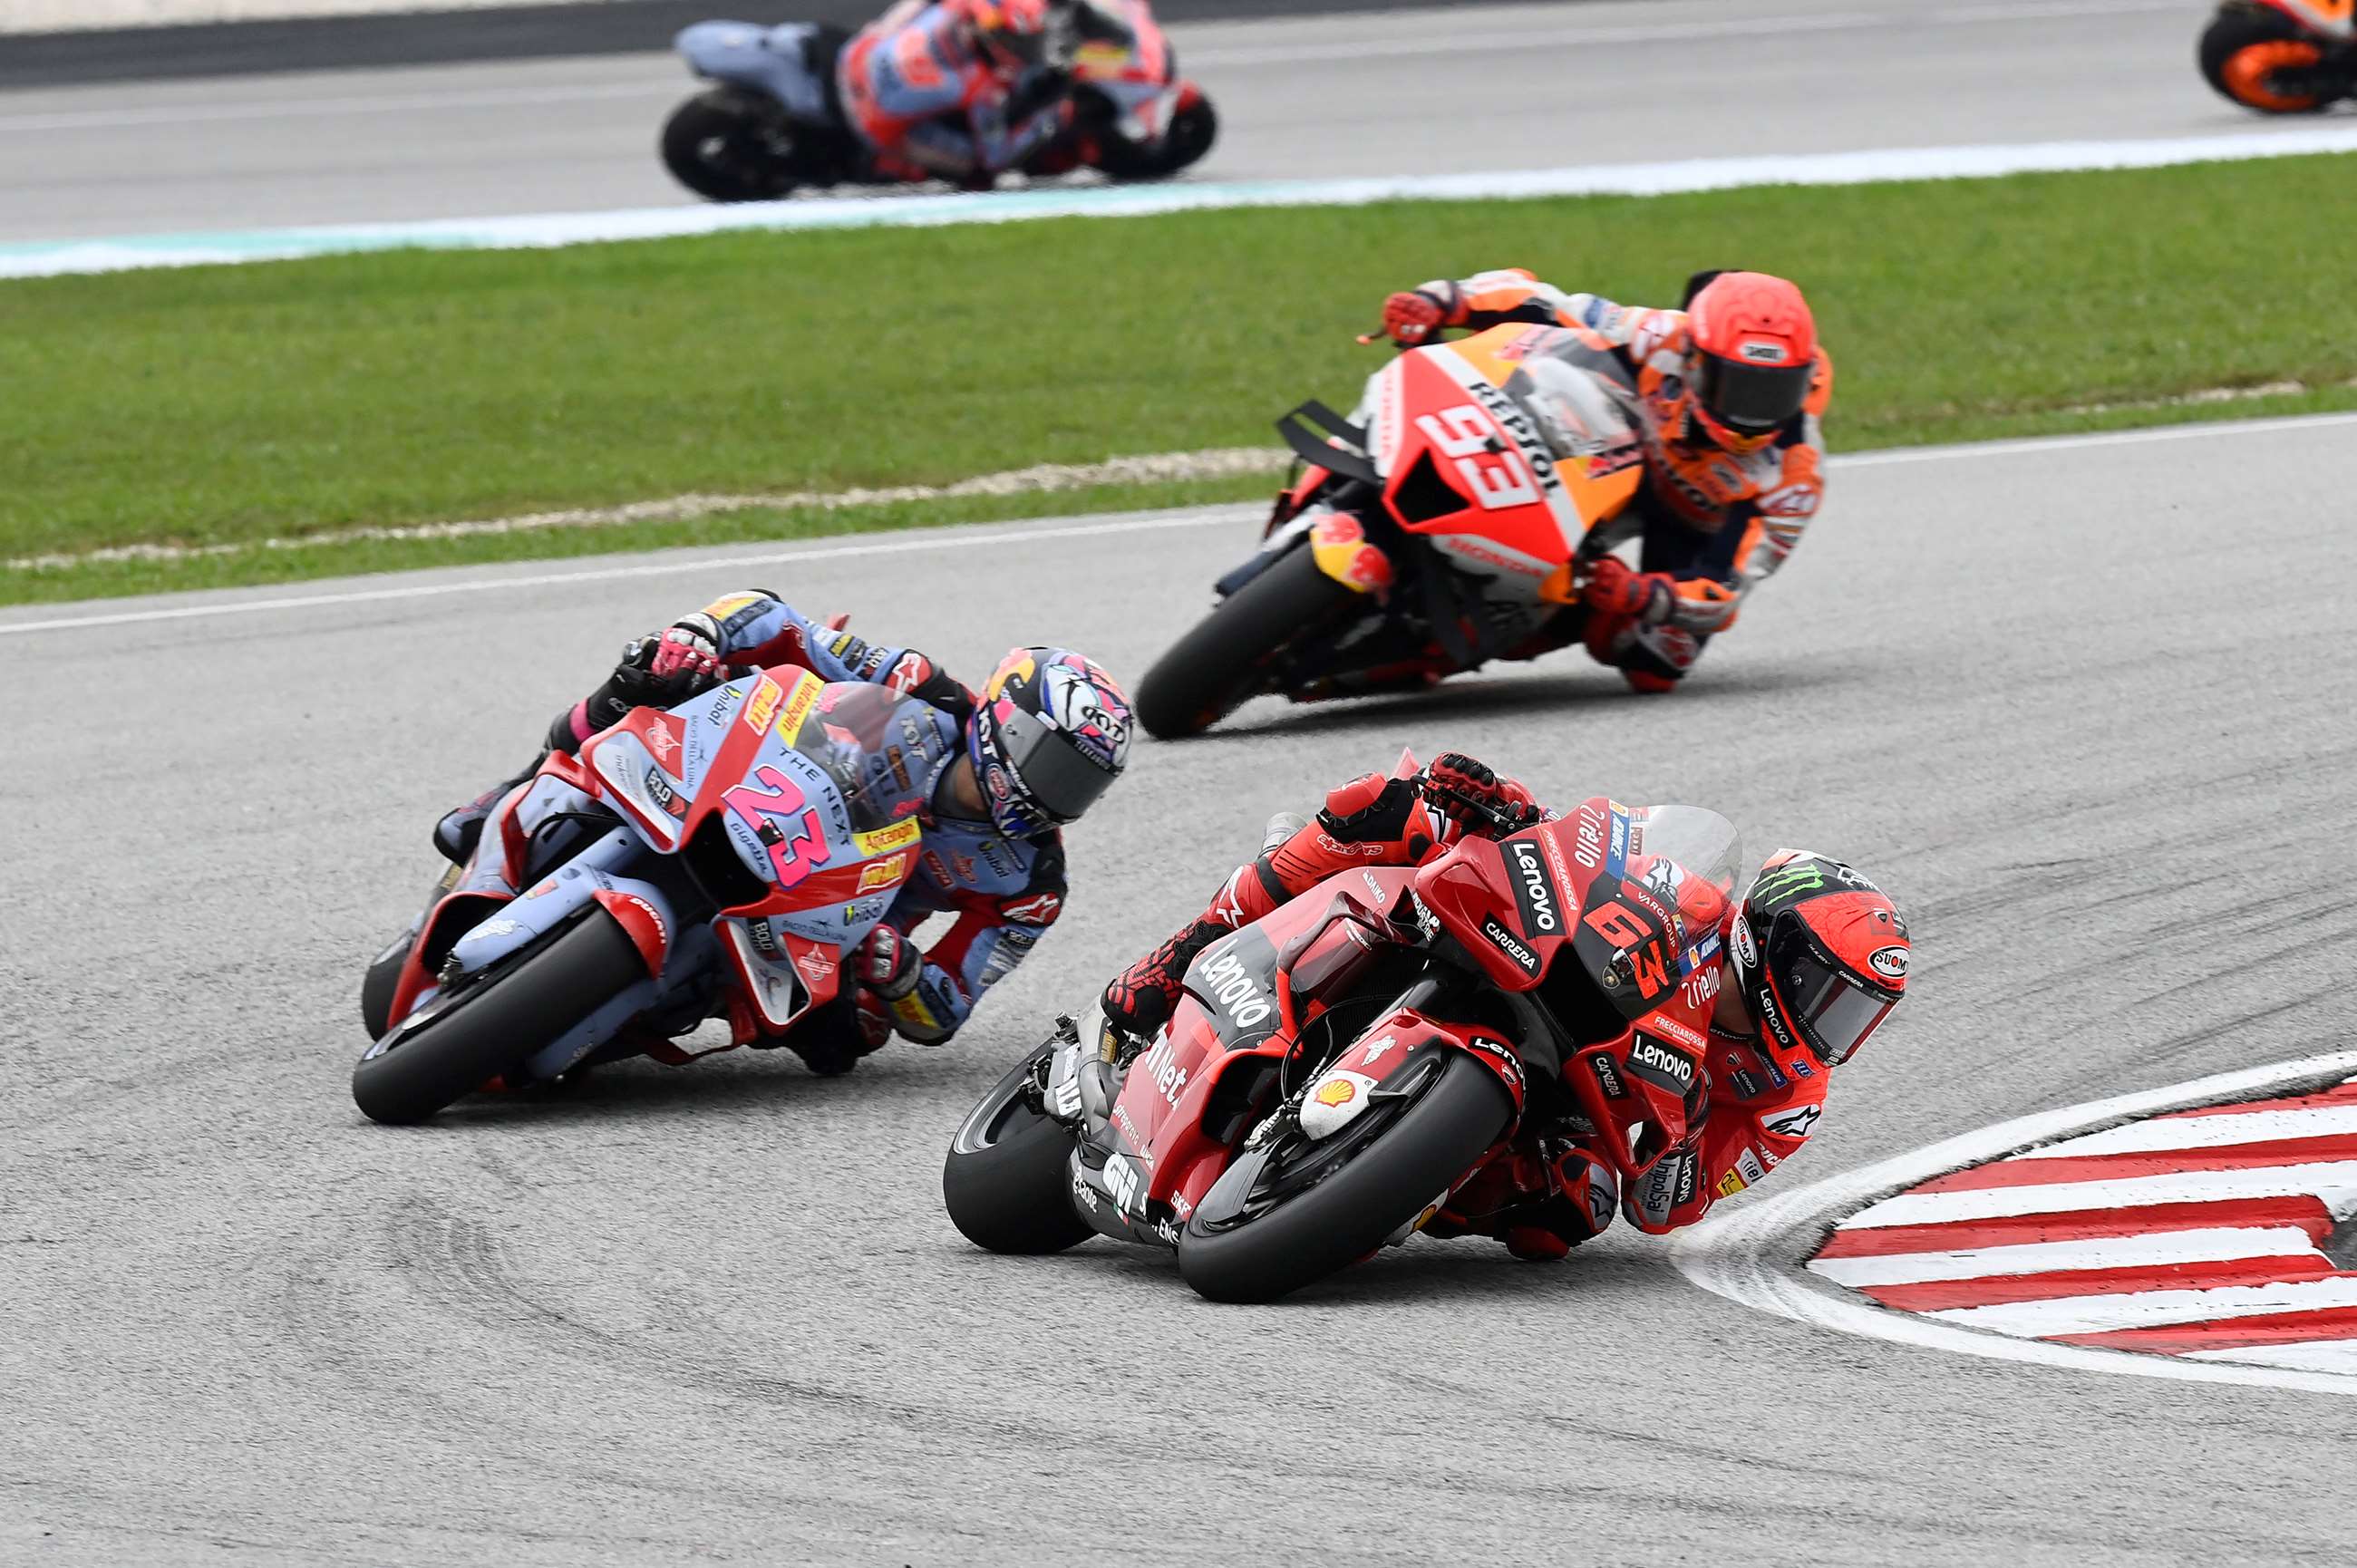 Will the best rider win the 2022 MotoGP championship? GRR